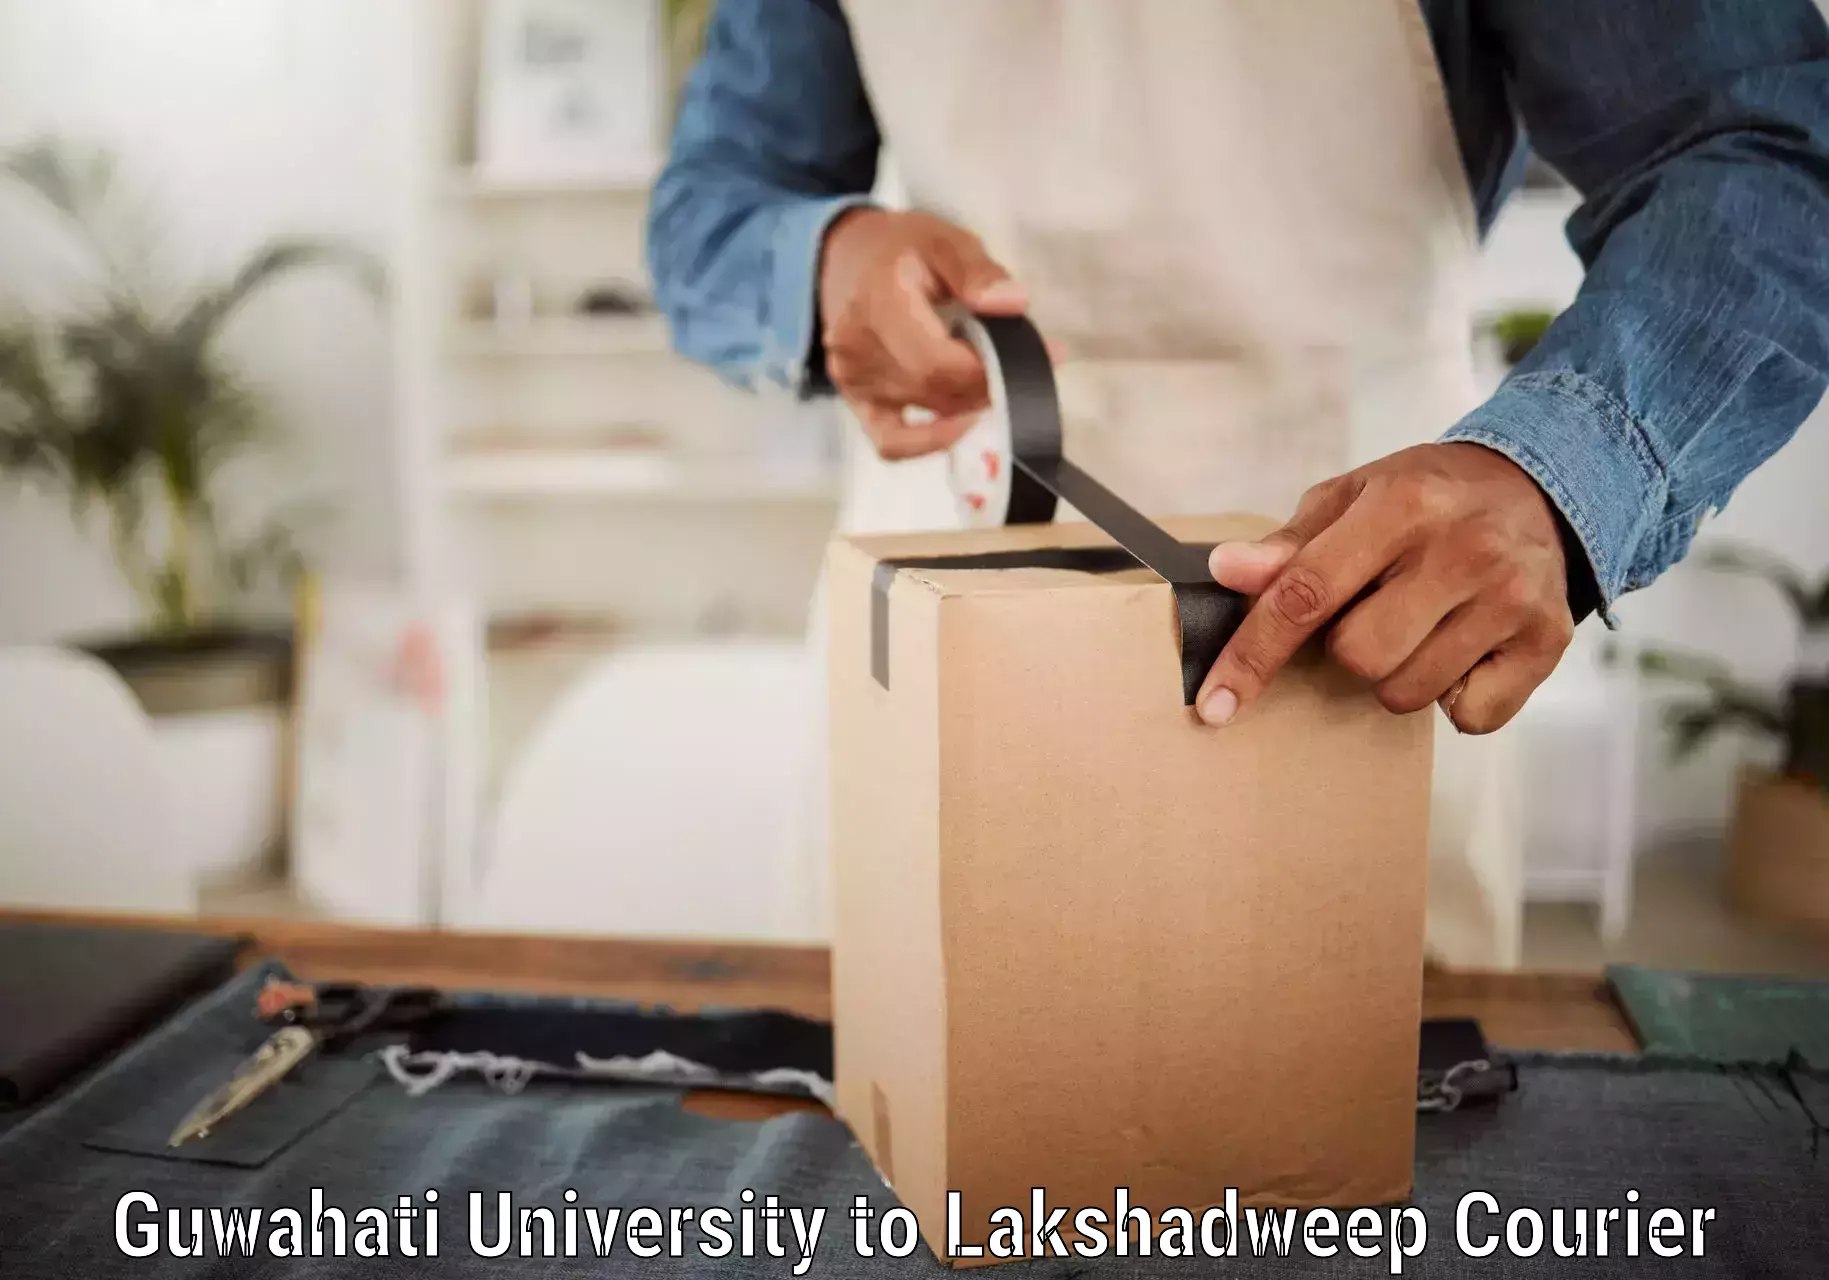 Parcel service for businesses Guwahati University to Lakshadweep